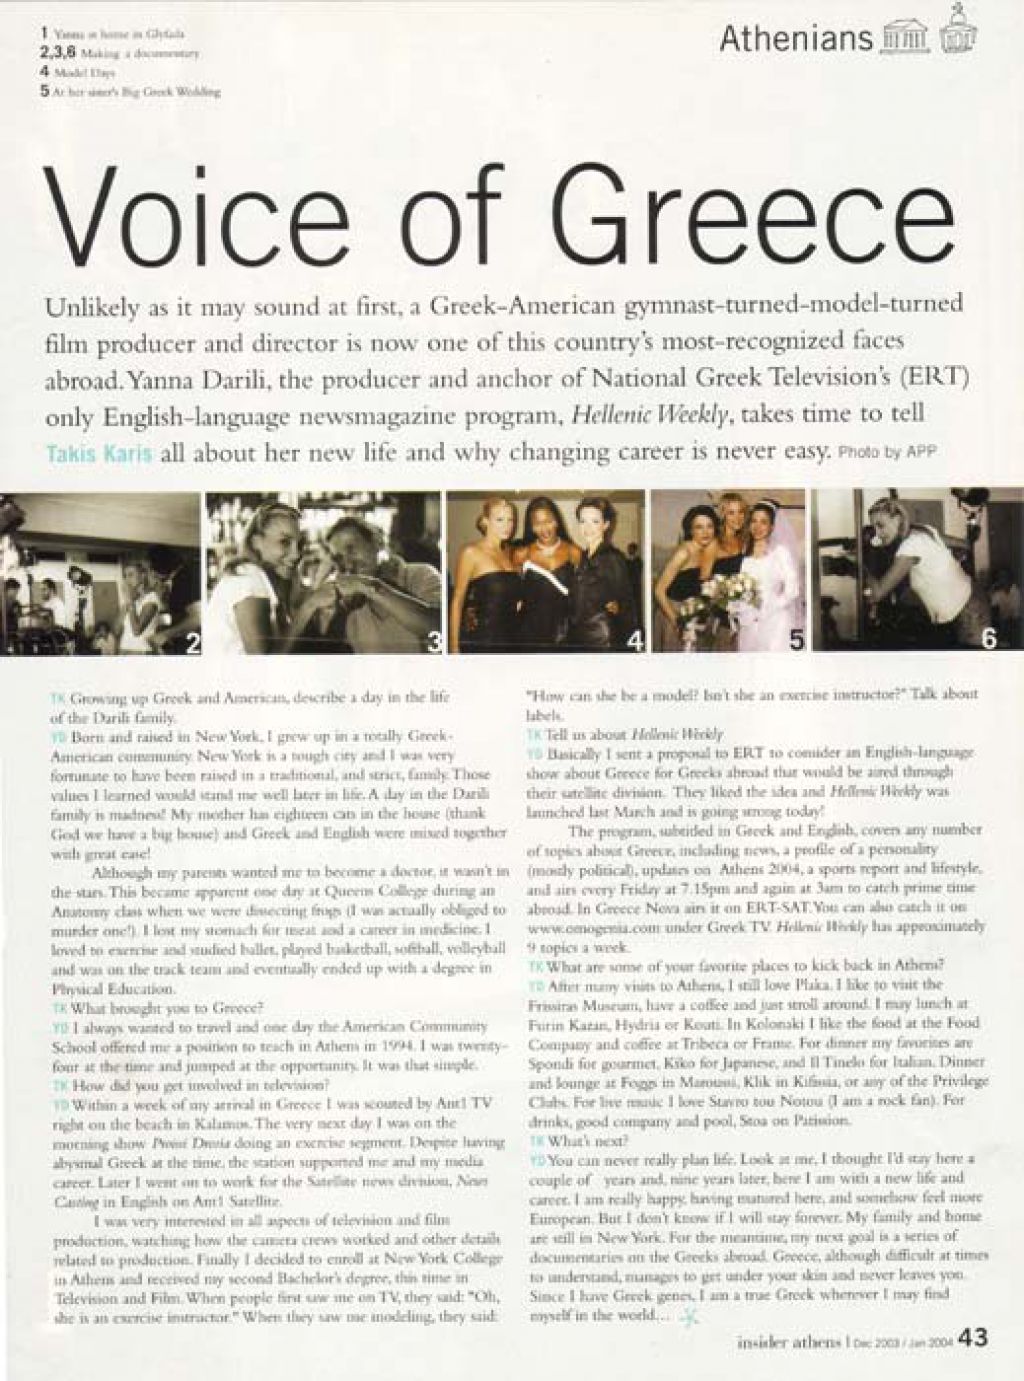 Insider Athens Magazine: May 2005 Voice of Greece